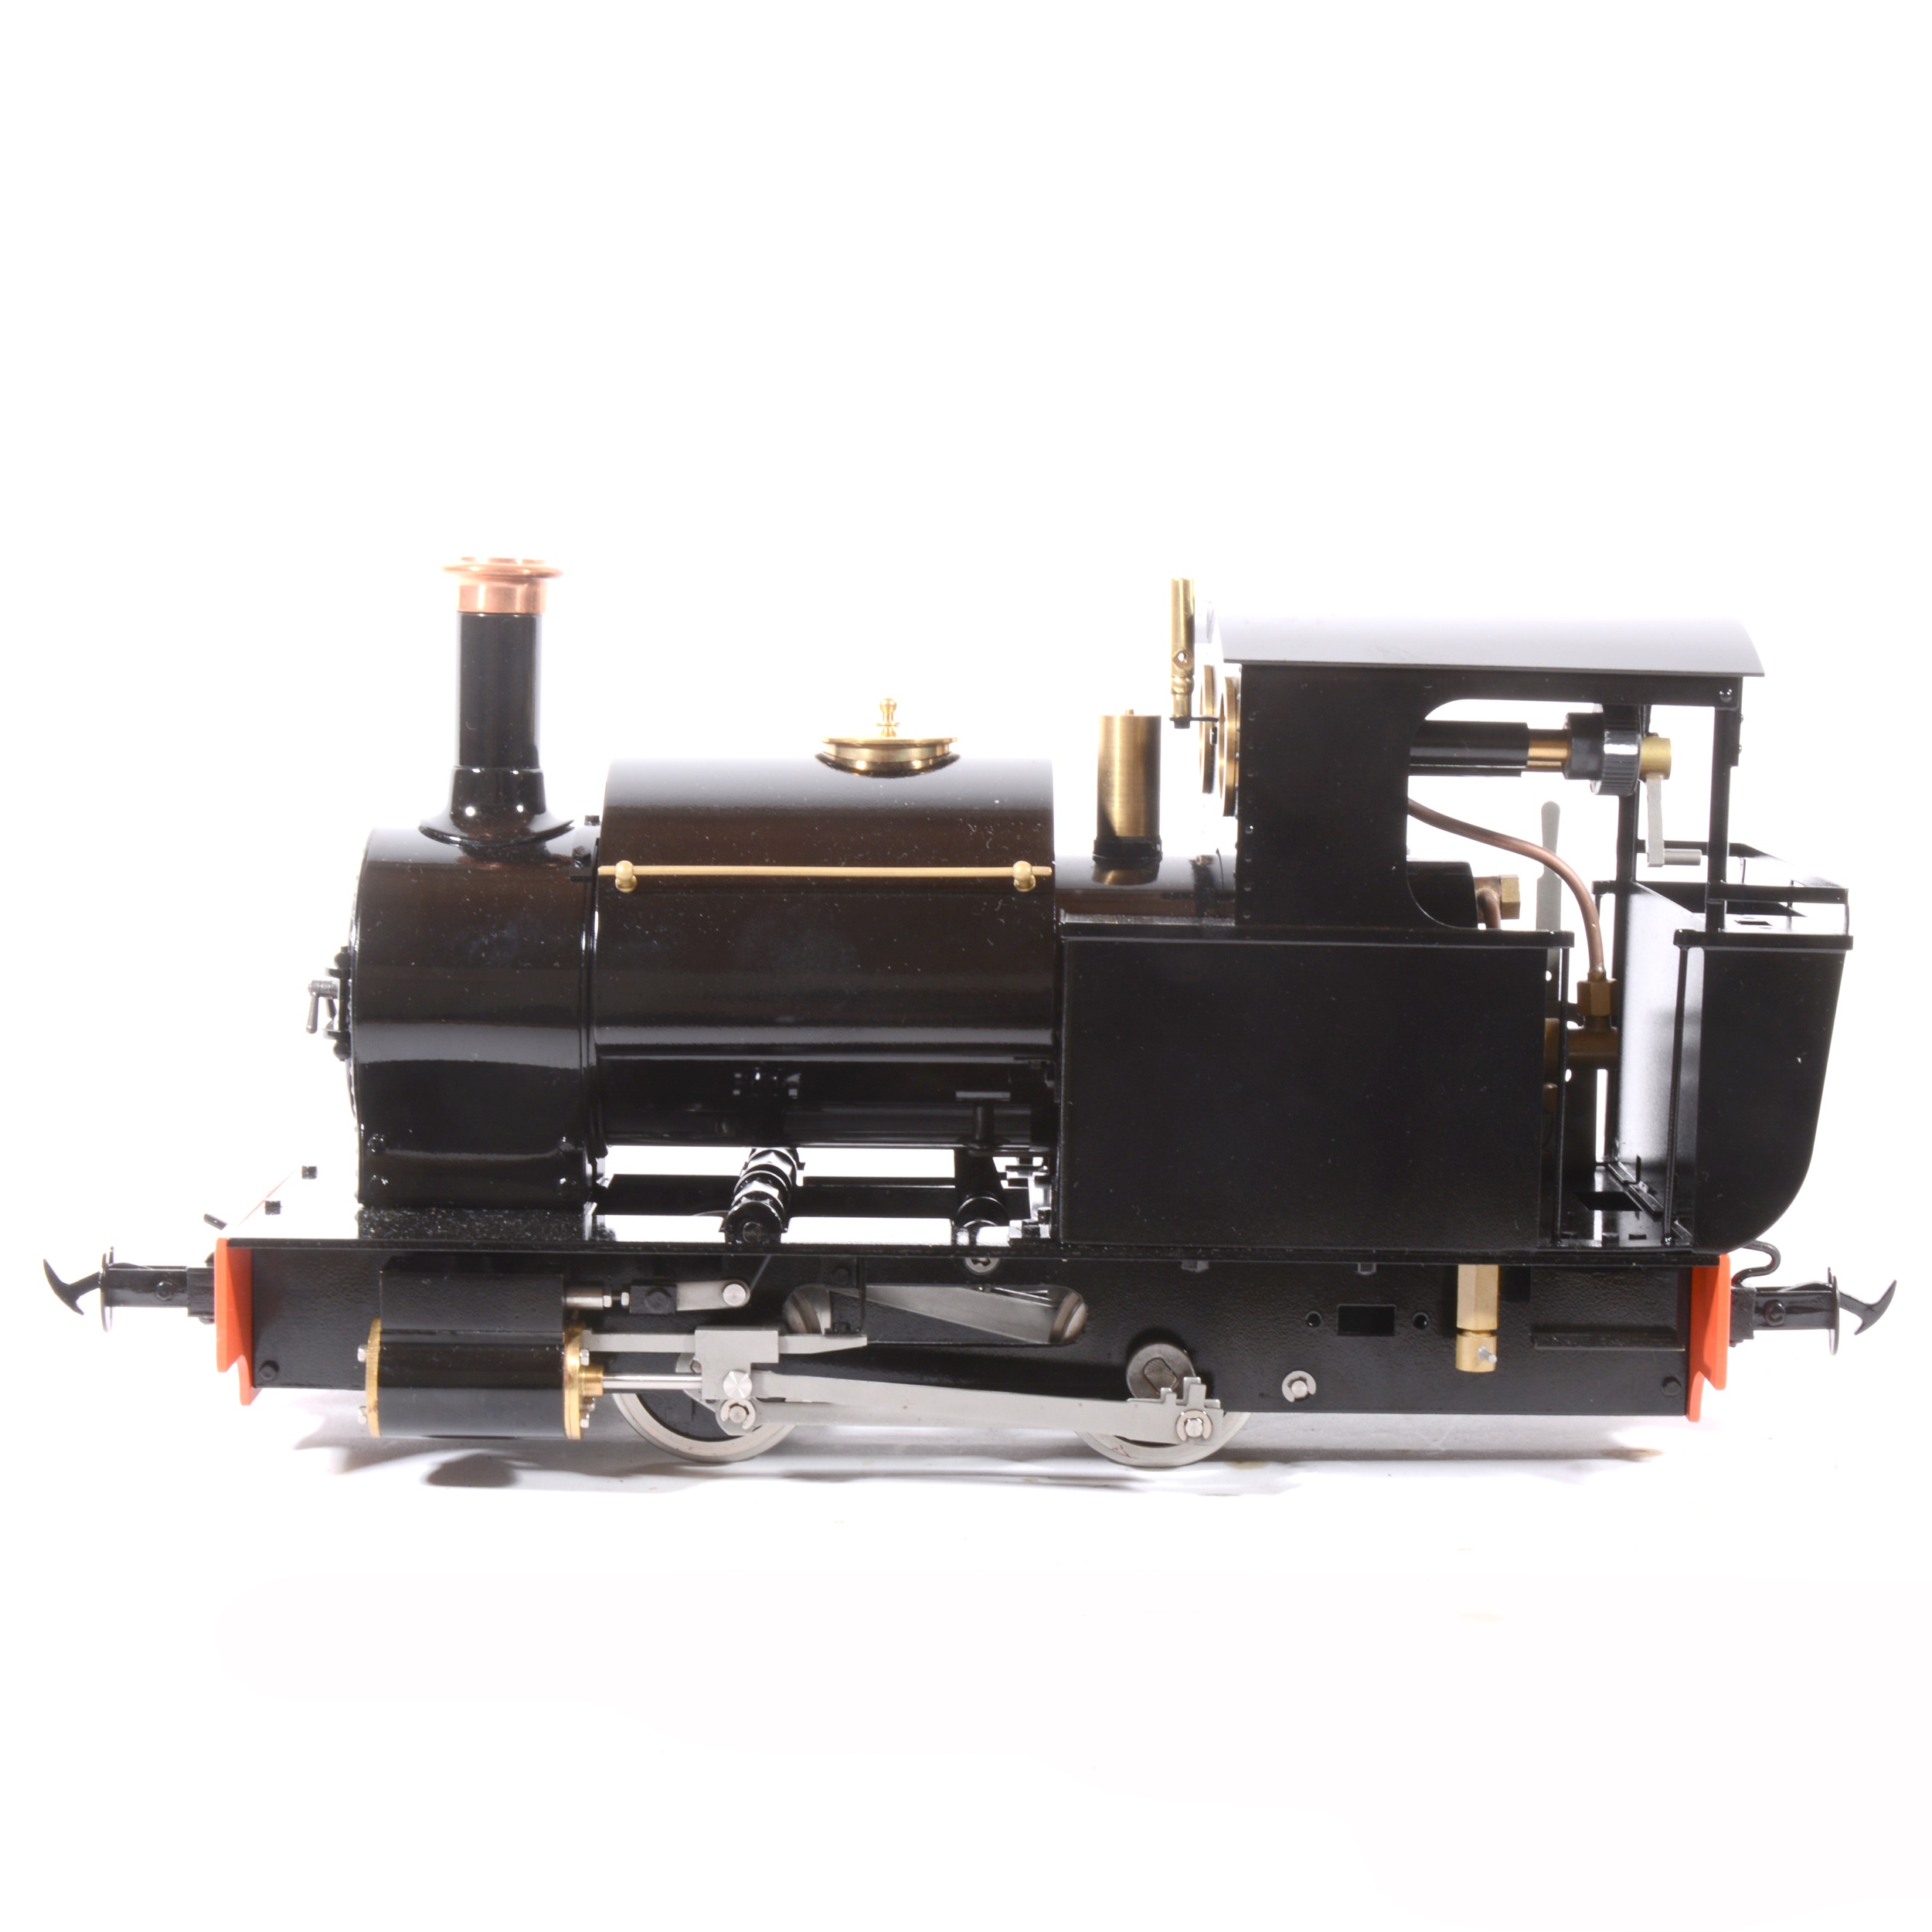 Accucraft live steam, gauge 1 / G scale, 45mm locomotive, Mortimer 0-4-0T, black, accessories and - Image 2 of 2